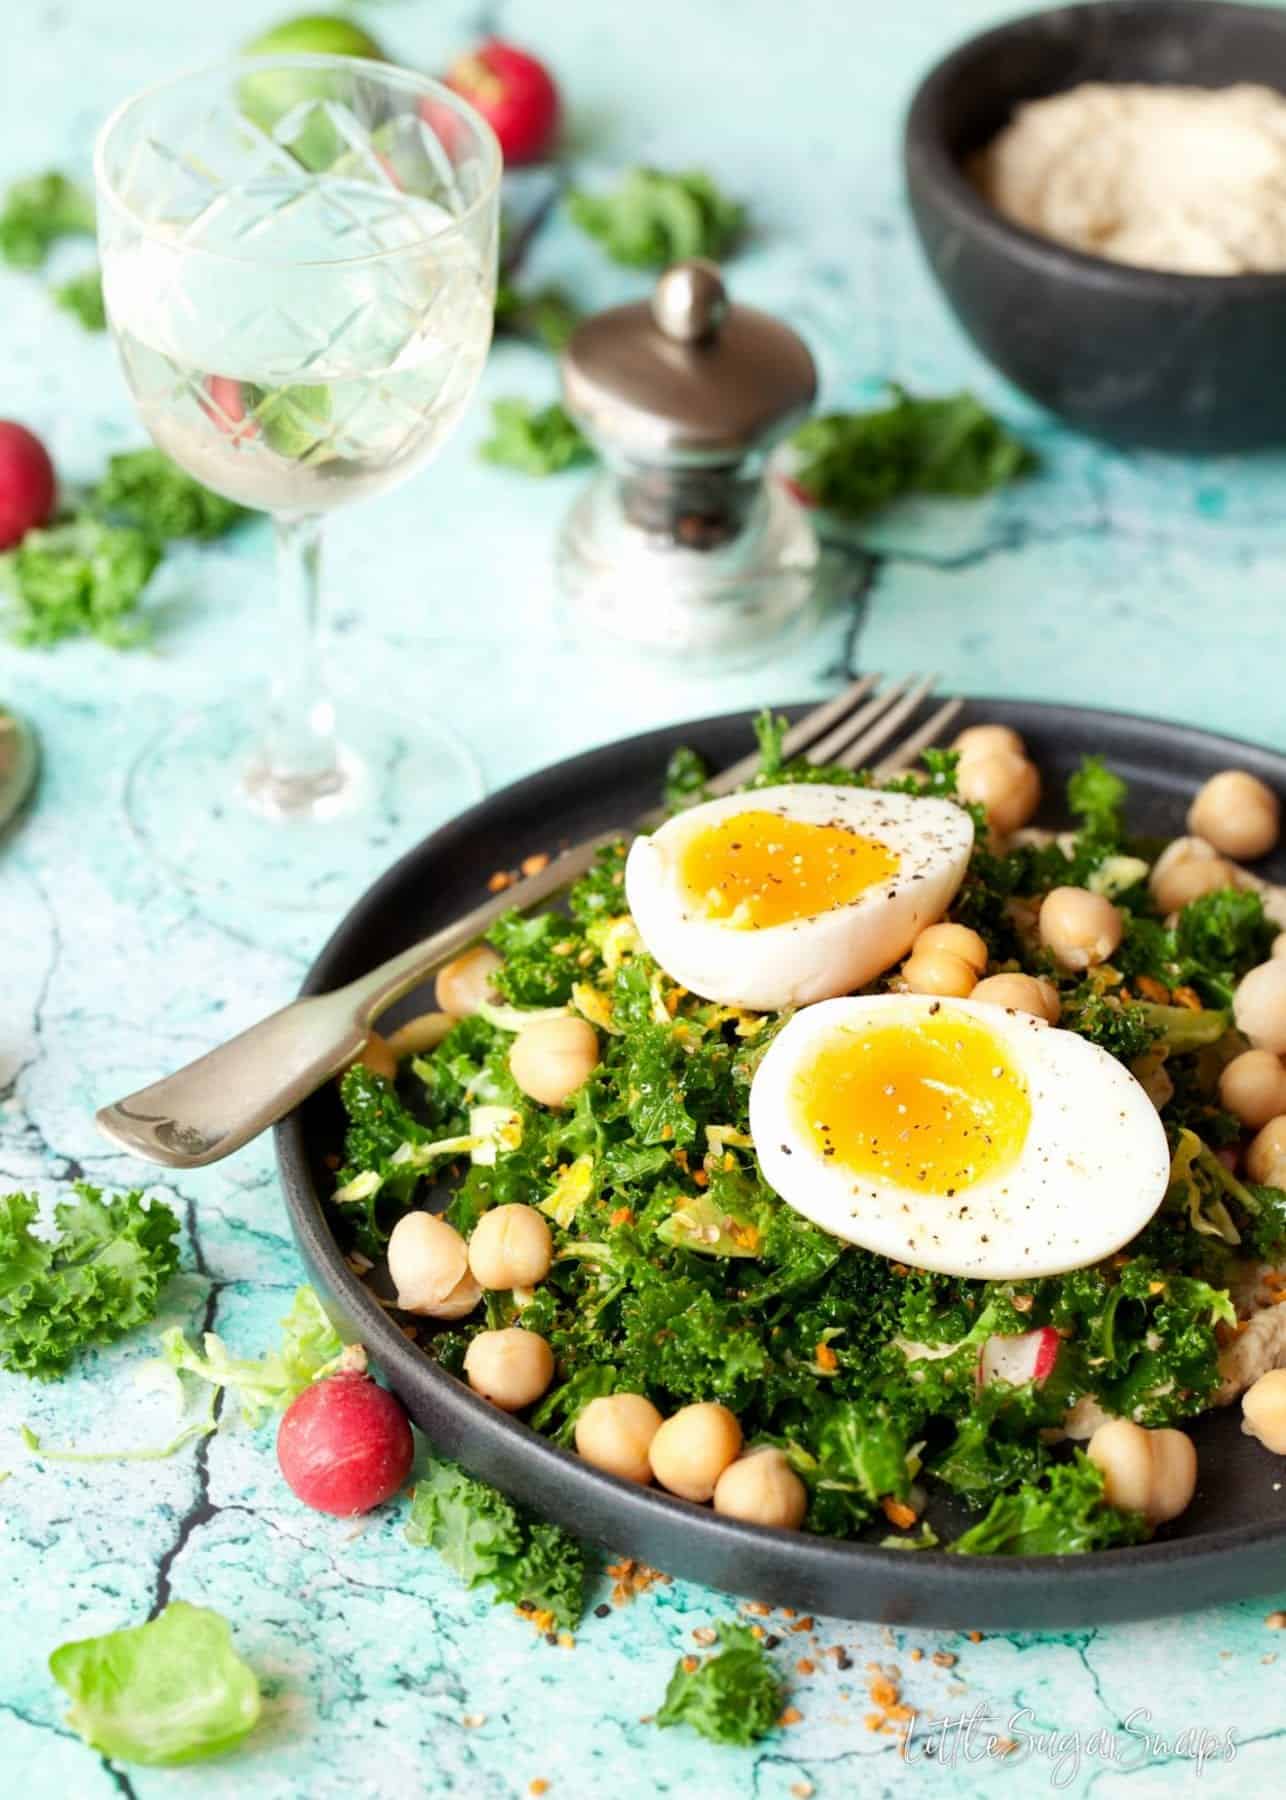 Kale and Sprout Salad with chickpeas and egg.